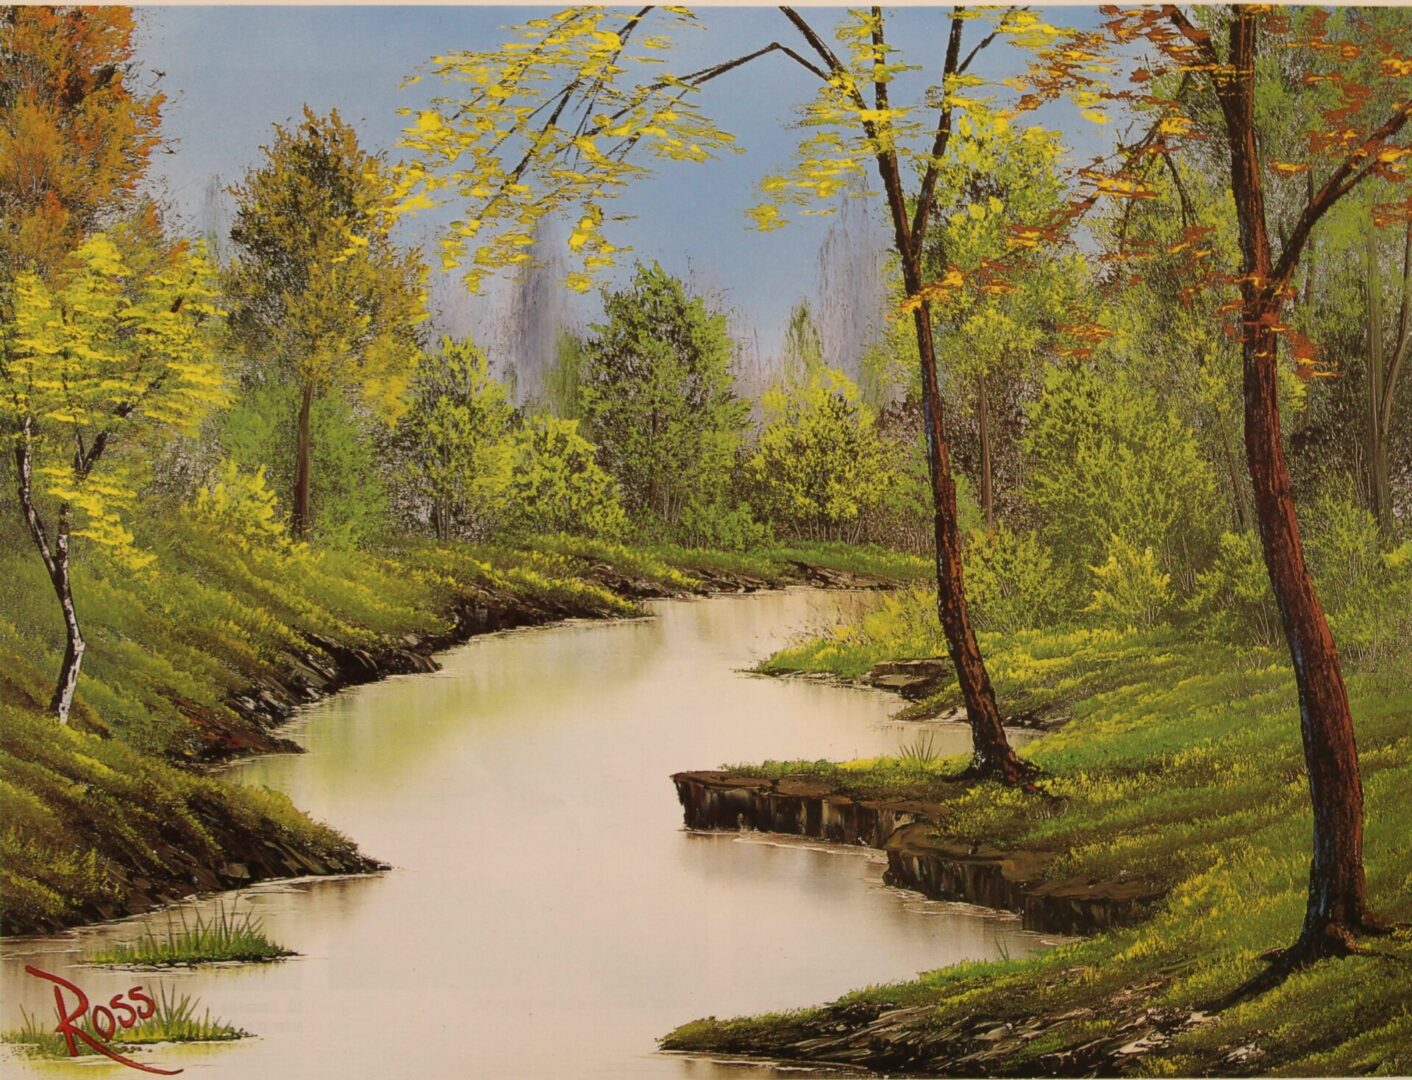 painting lazy river with trees and greenery